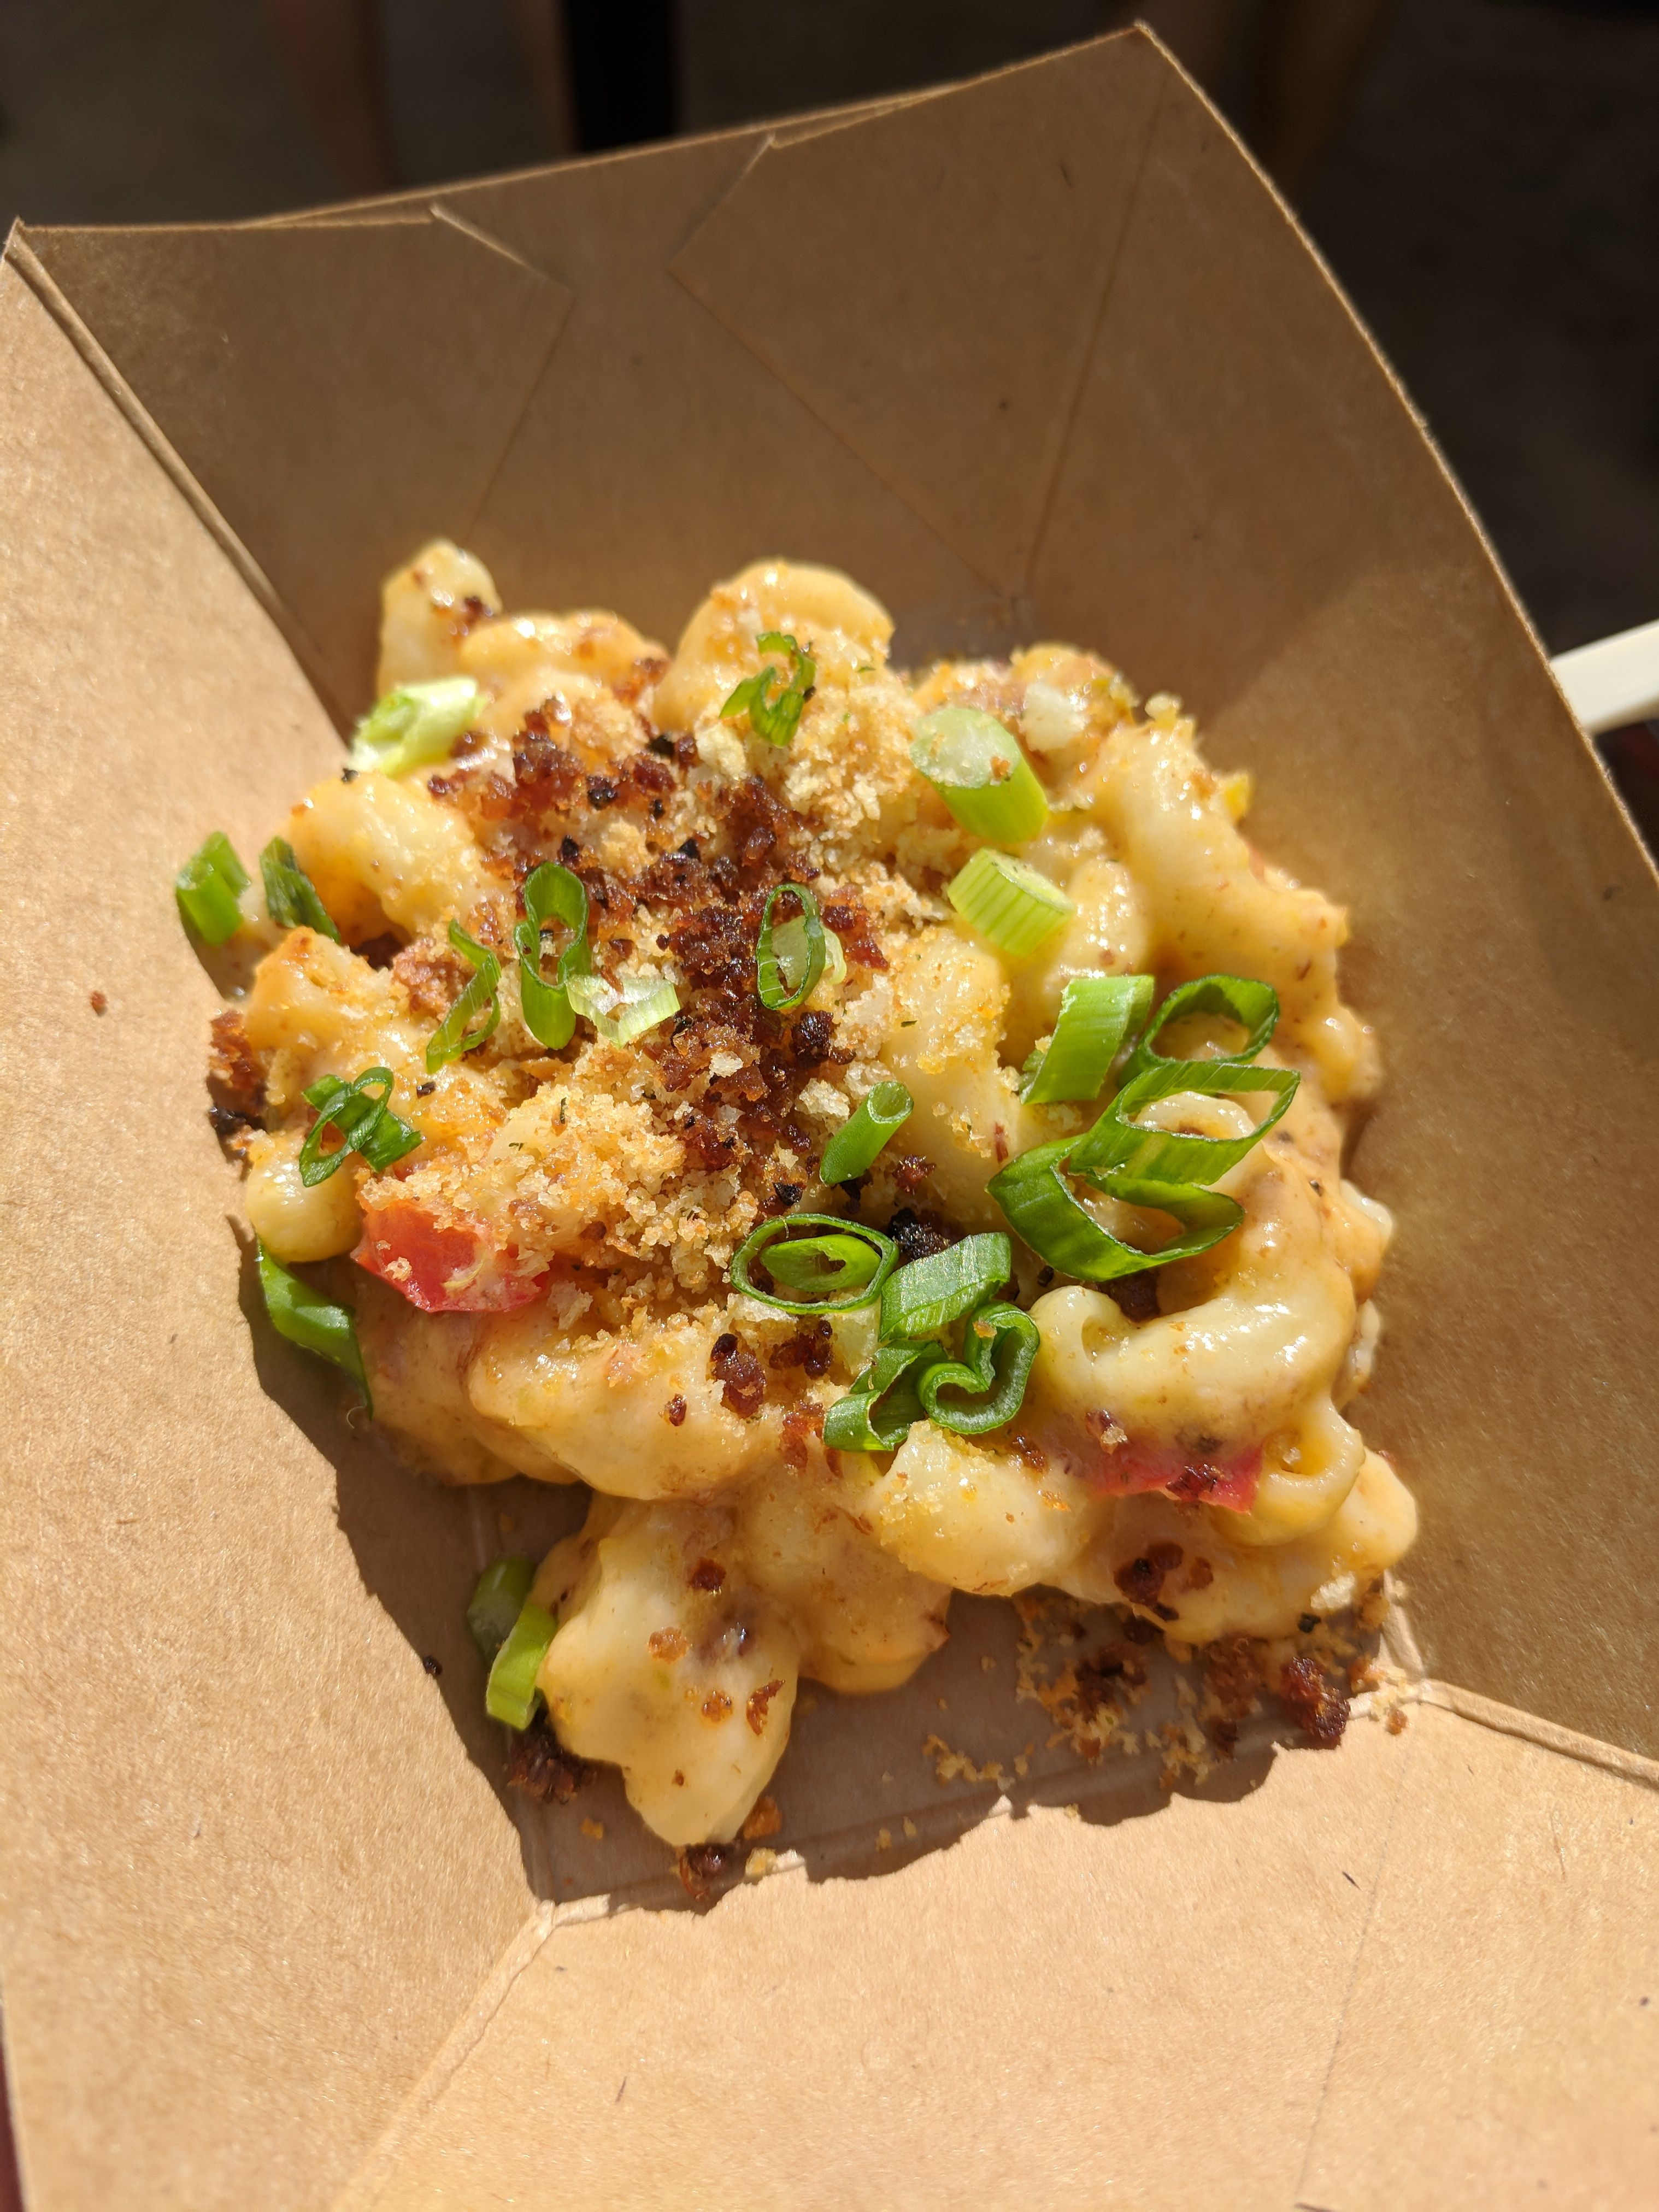 Active Eats: Loaded Mac ‘n' Cheese with Nueske's® Pepper Bacon, Cheddar Cheese, Peppers and Green Onions